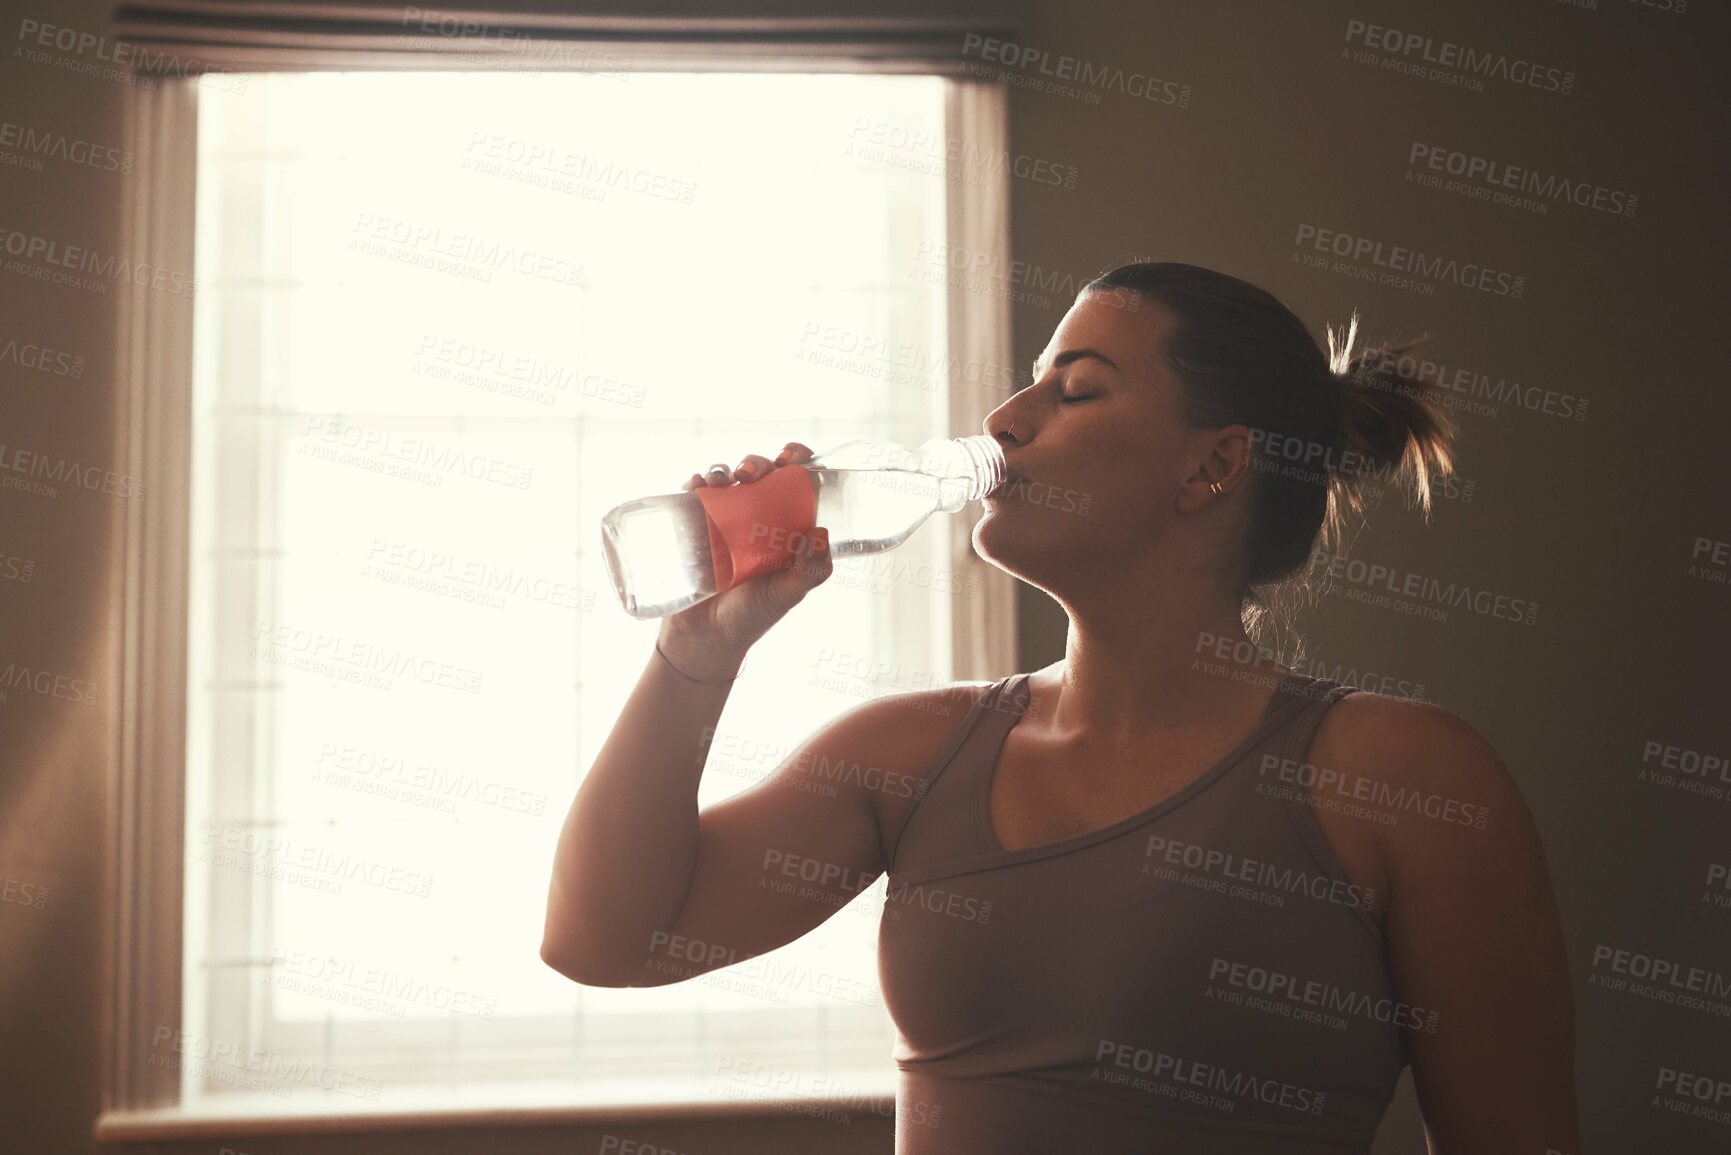 Buy stock photo Shot of a young woman drinking water after her workout at home